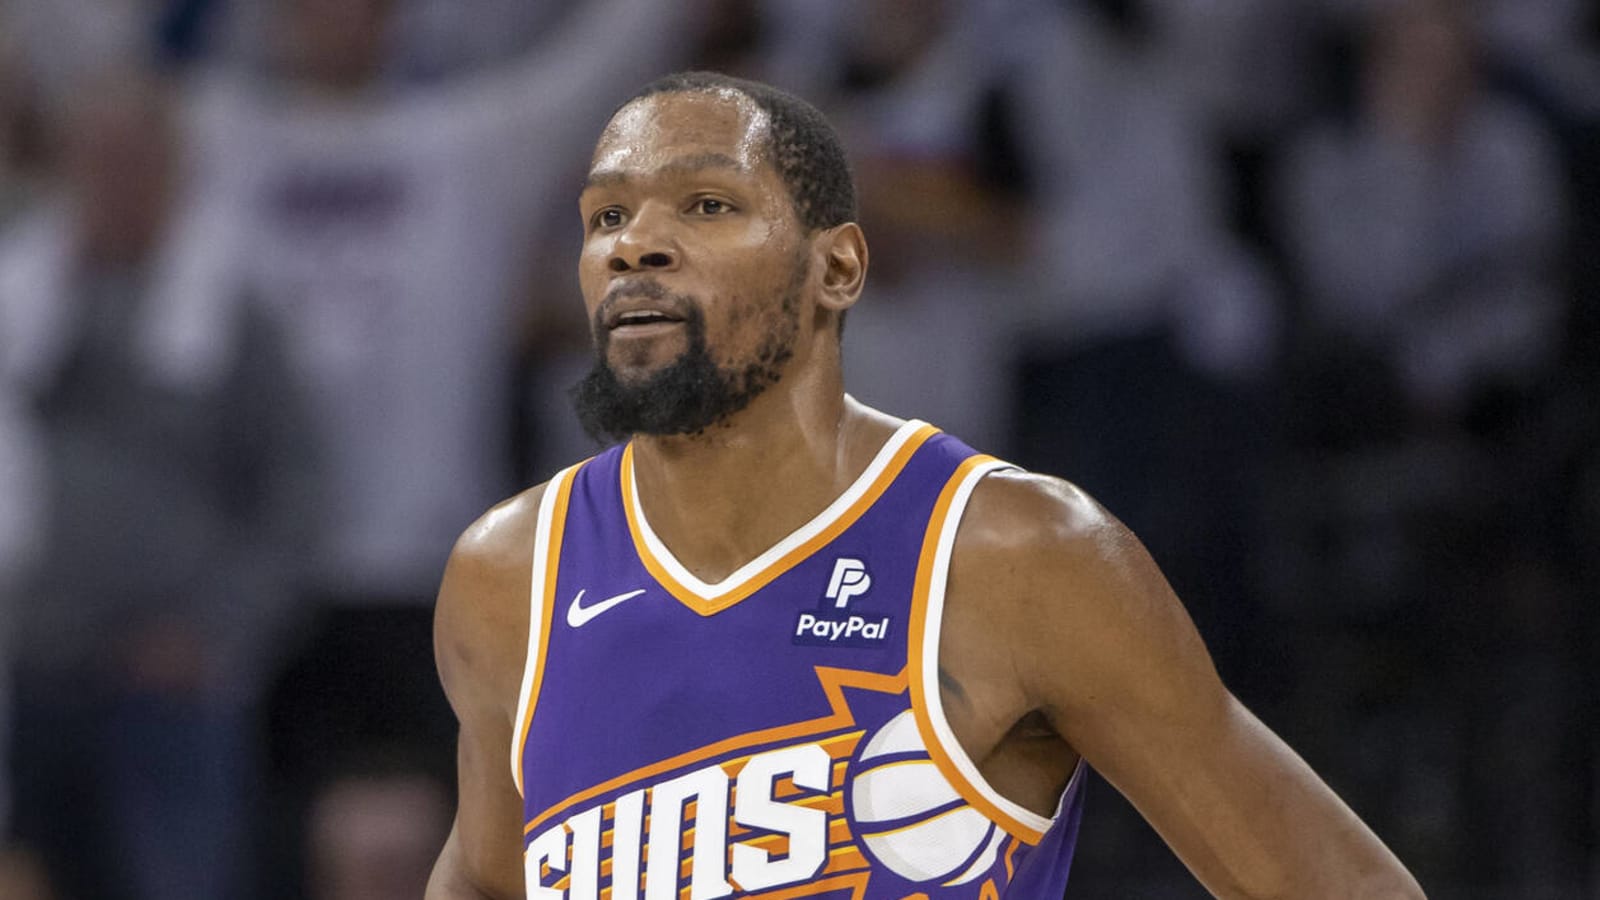 Suns GM faces backlash for bizarre claims about Kevin Durant